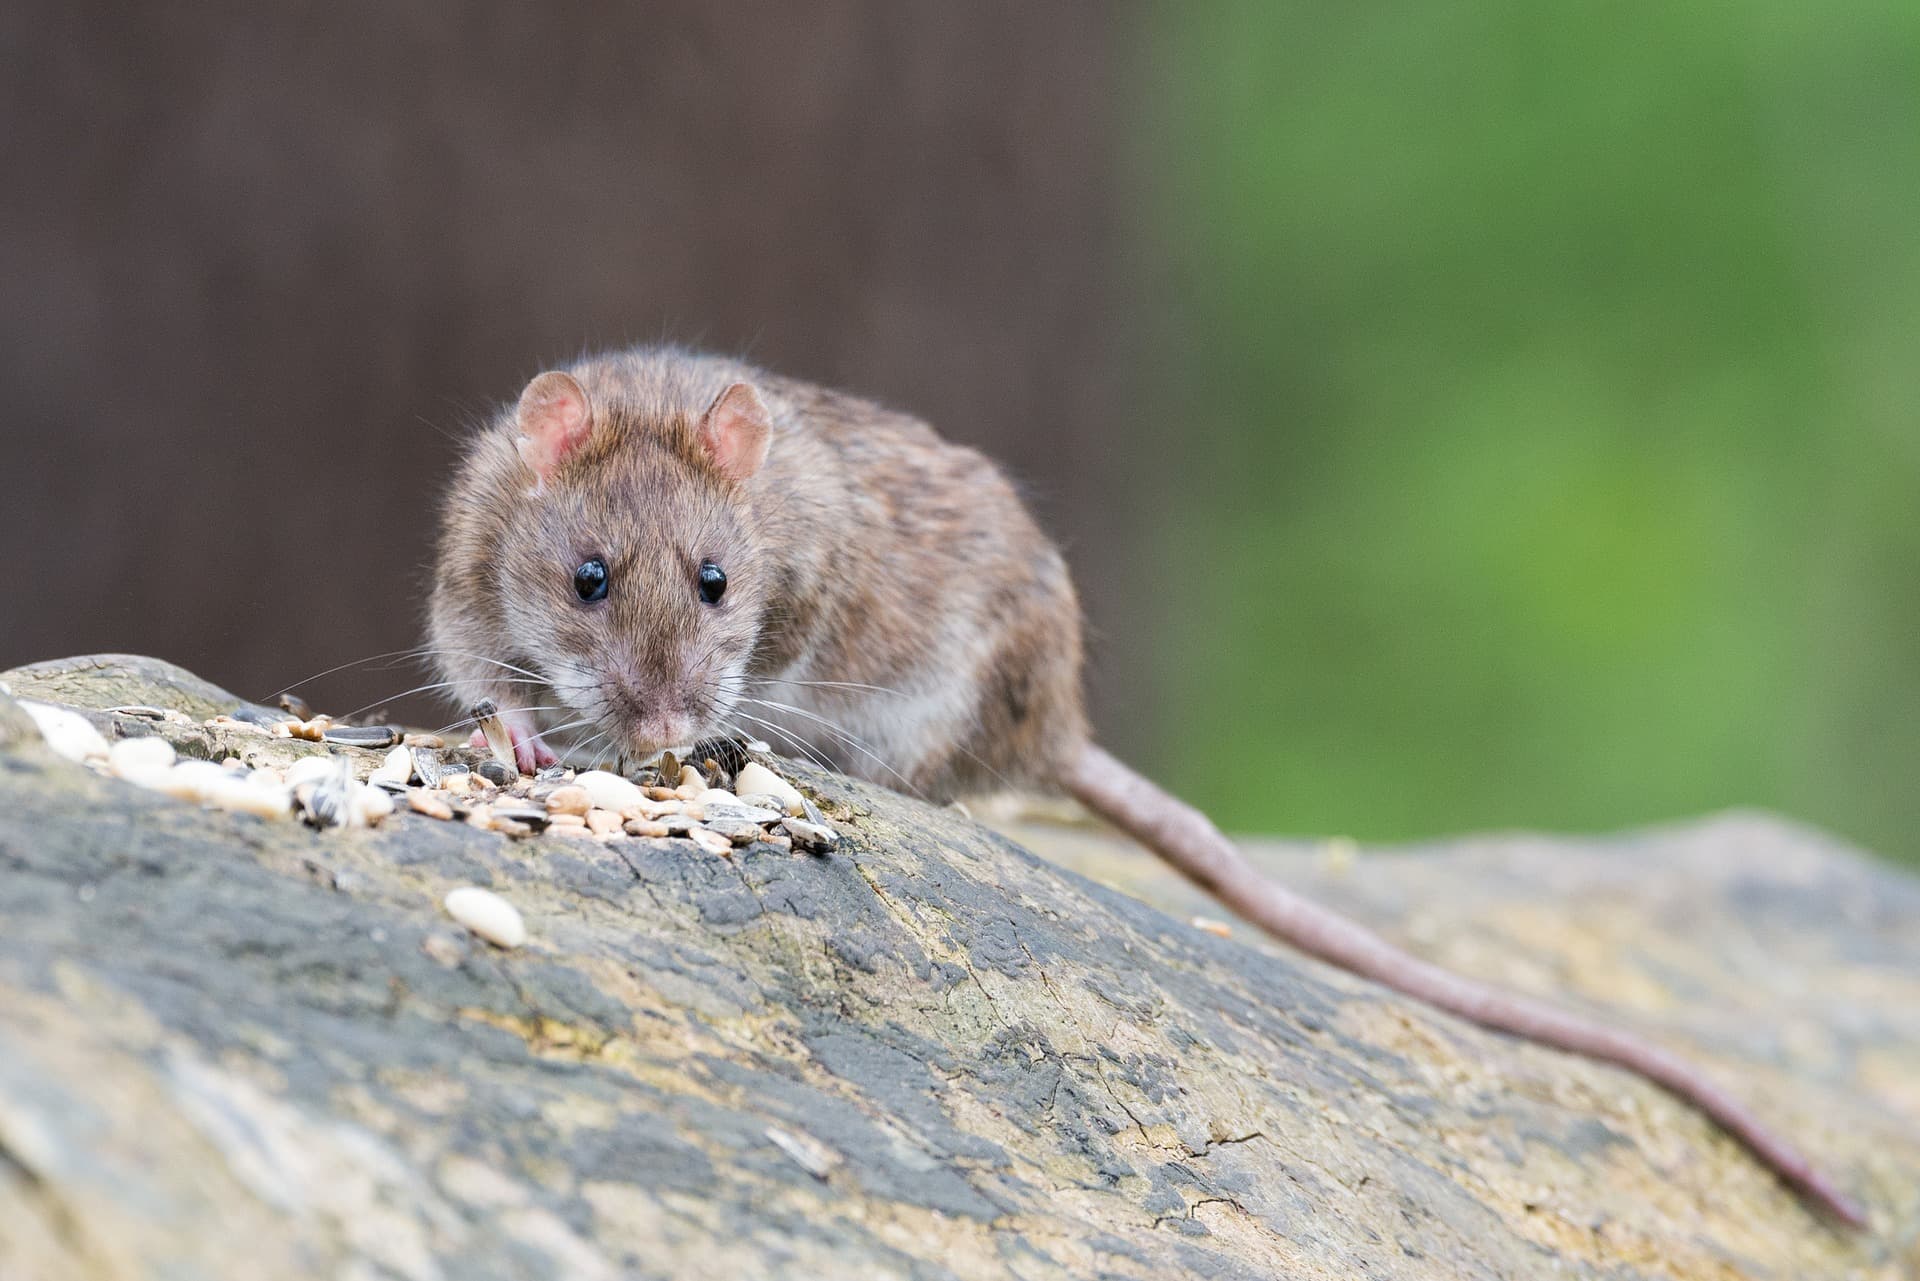 Mouse in the Attic - How to Get Rid of Mice In the Attic